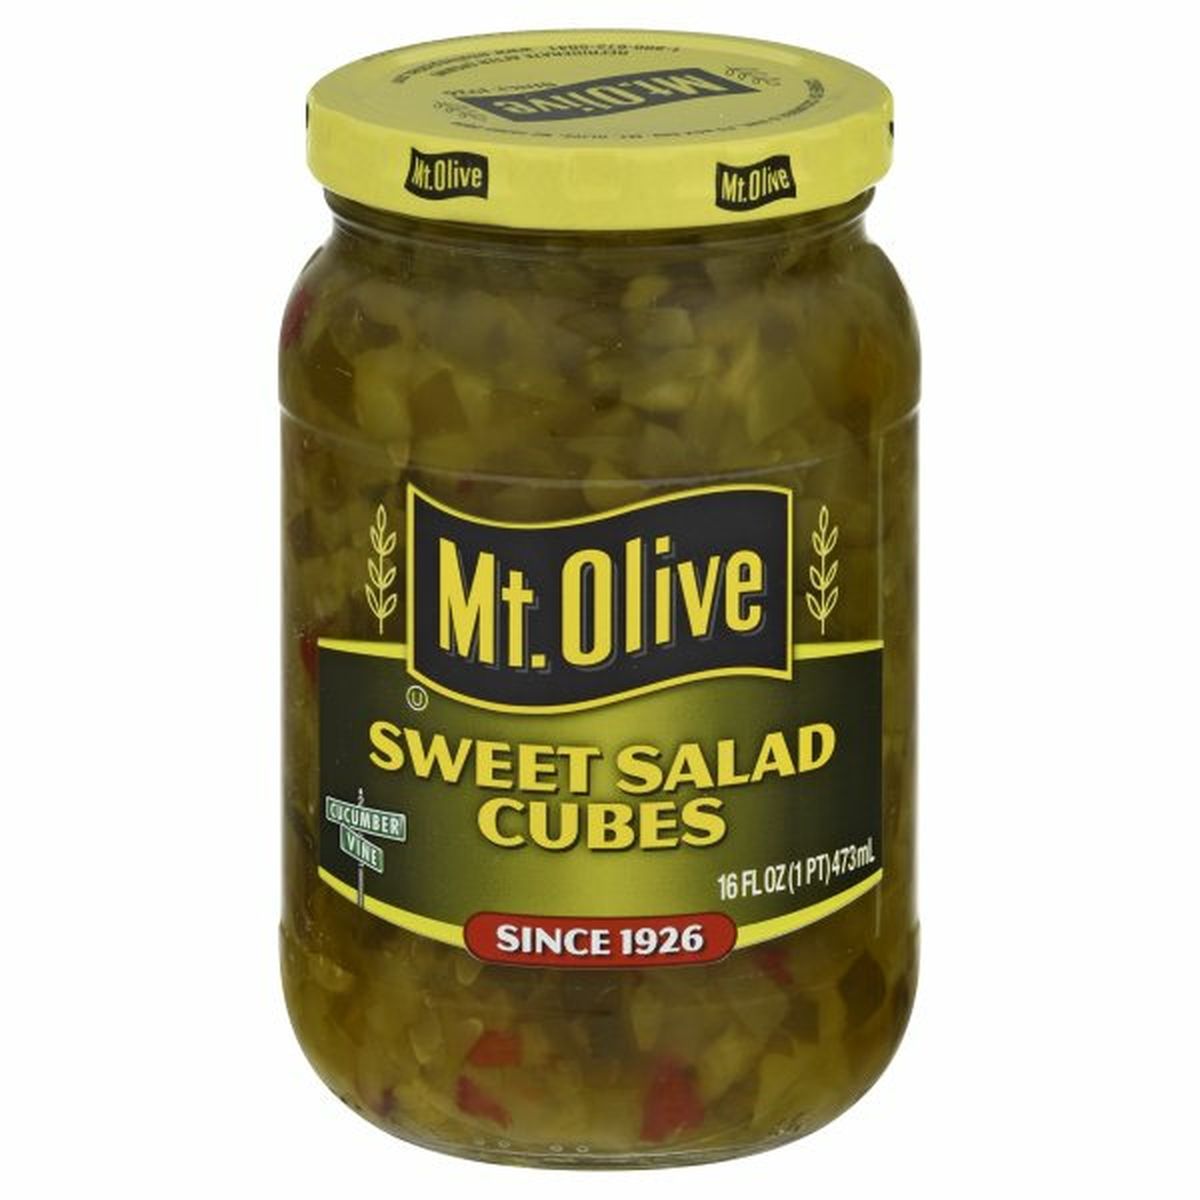 Calories in Mt. Olive Salad Cubes, Sweet